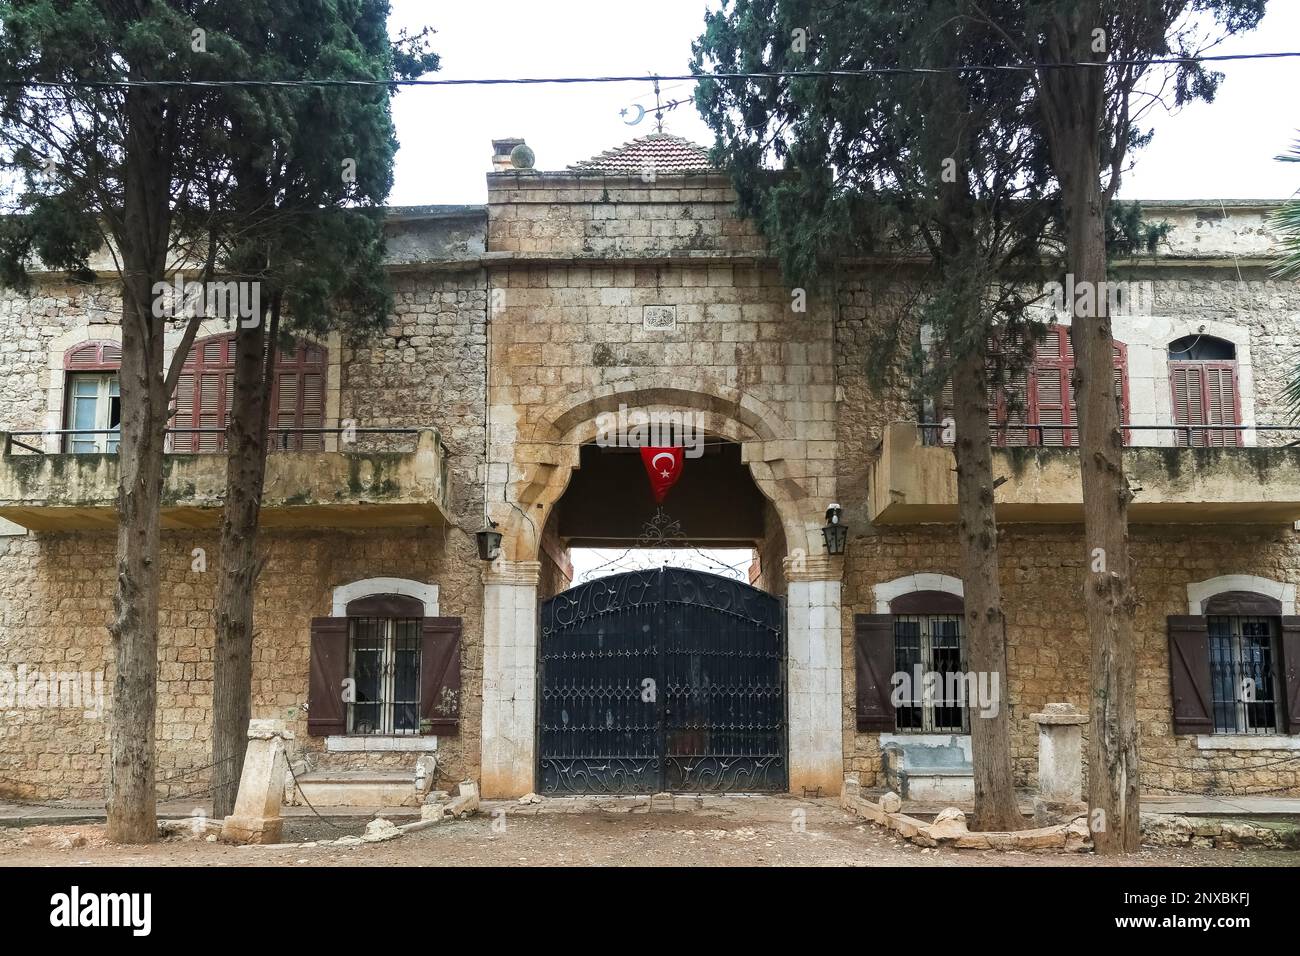 The old mansion used in the critical comedy movie Kibar Feyzo by famous Turkish actors Kemal Sunal and Şener Şen. Reyhanlı, Hatay, Turkey. Stock Photo